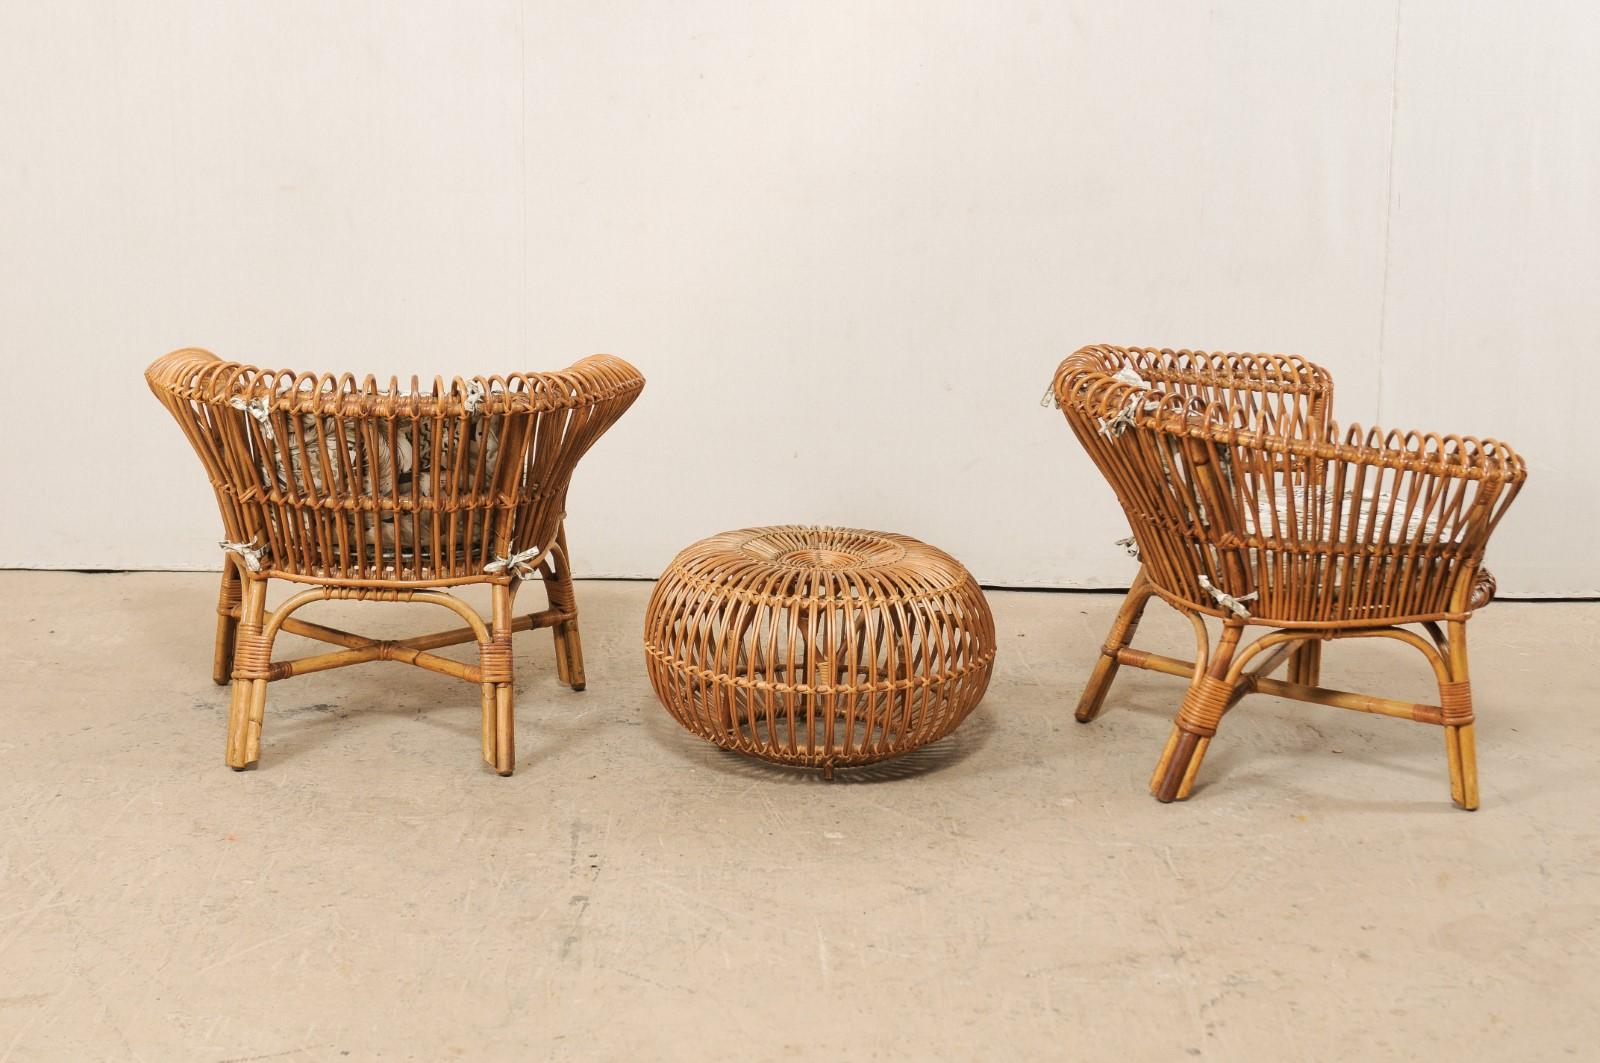 20th Century Pair of Vintage Rattan Chairs and Ottoman Patio Set